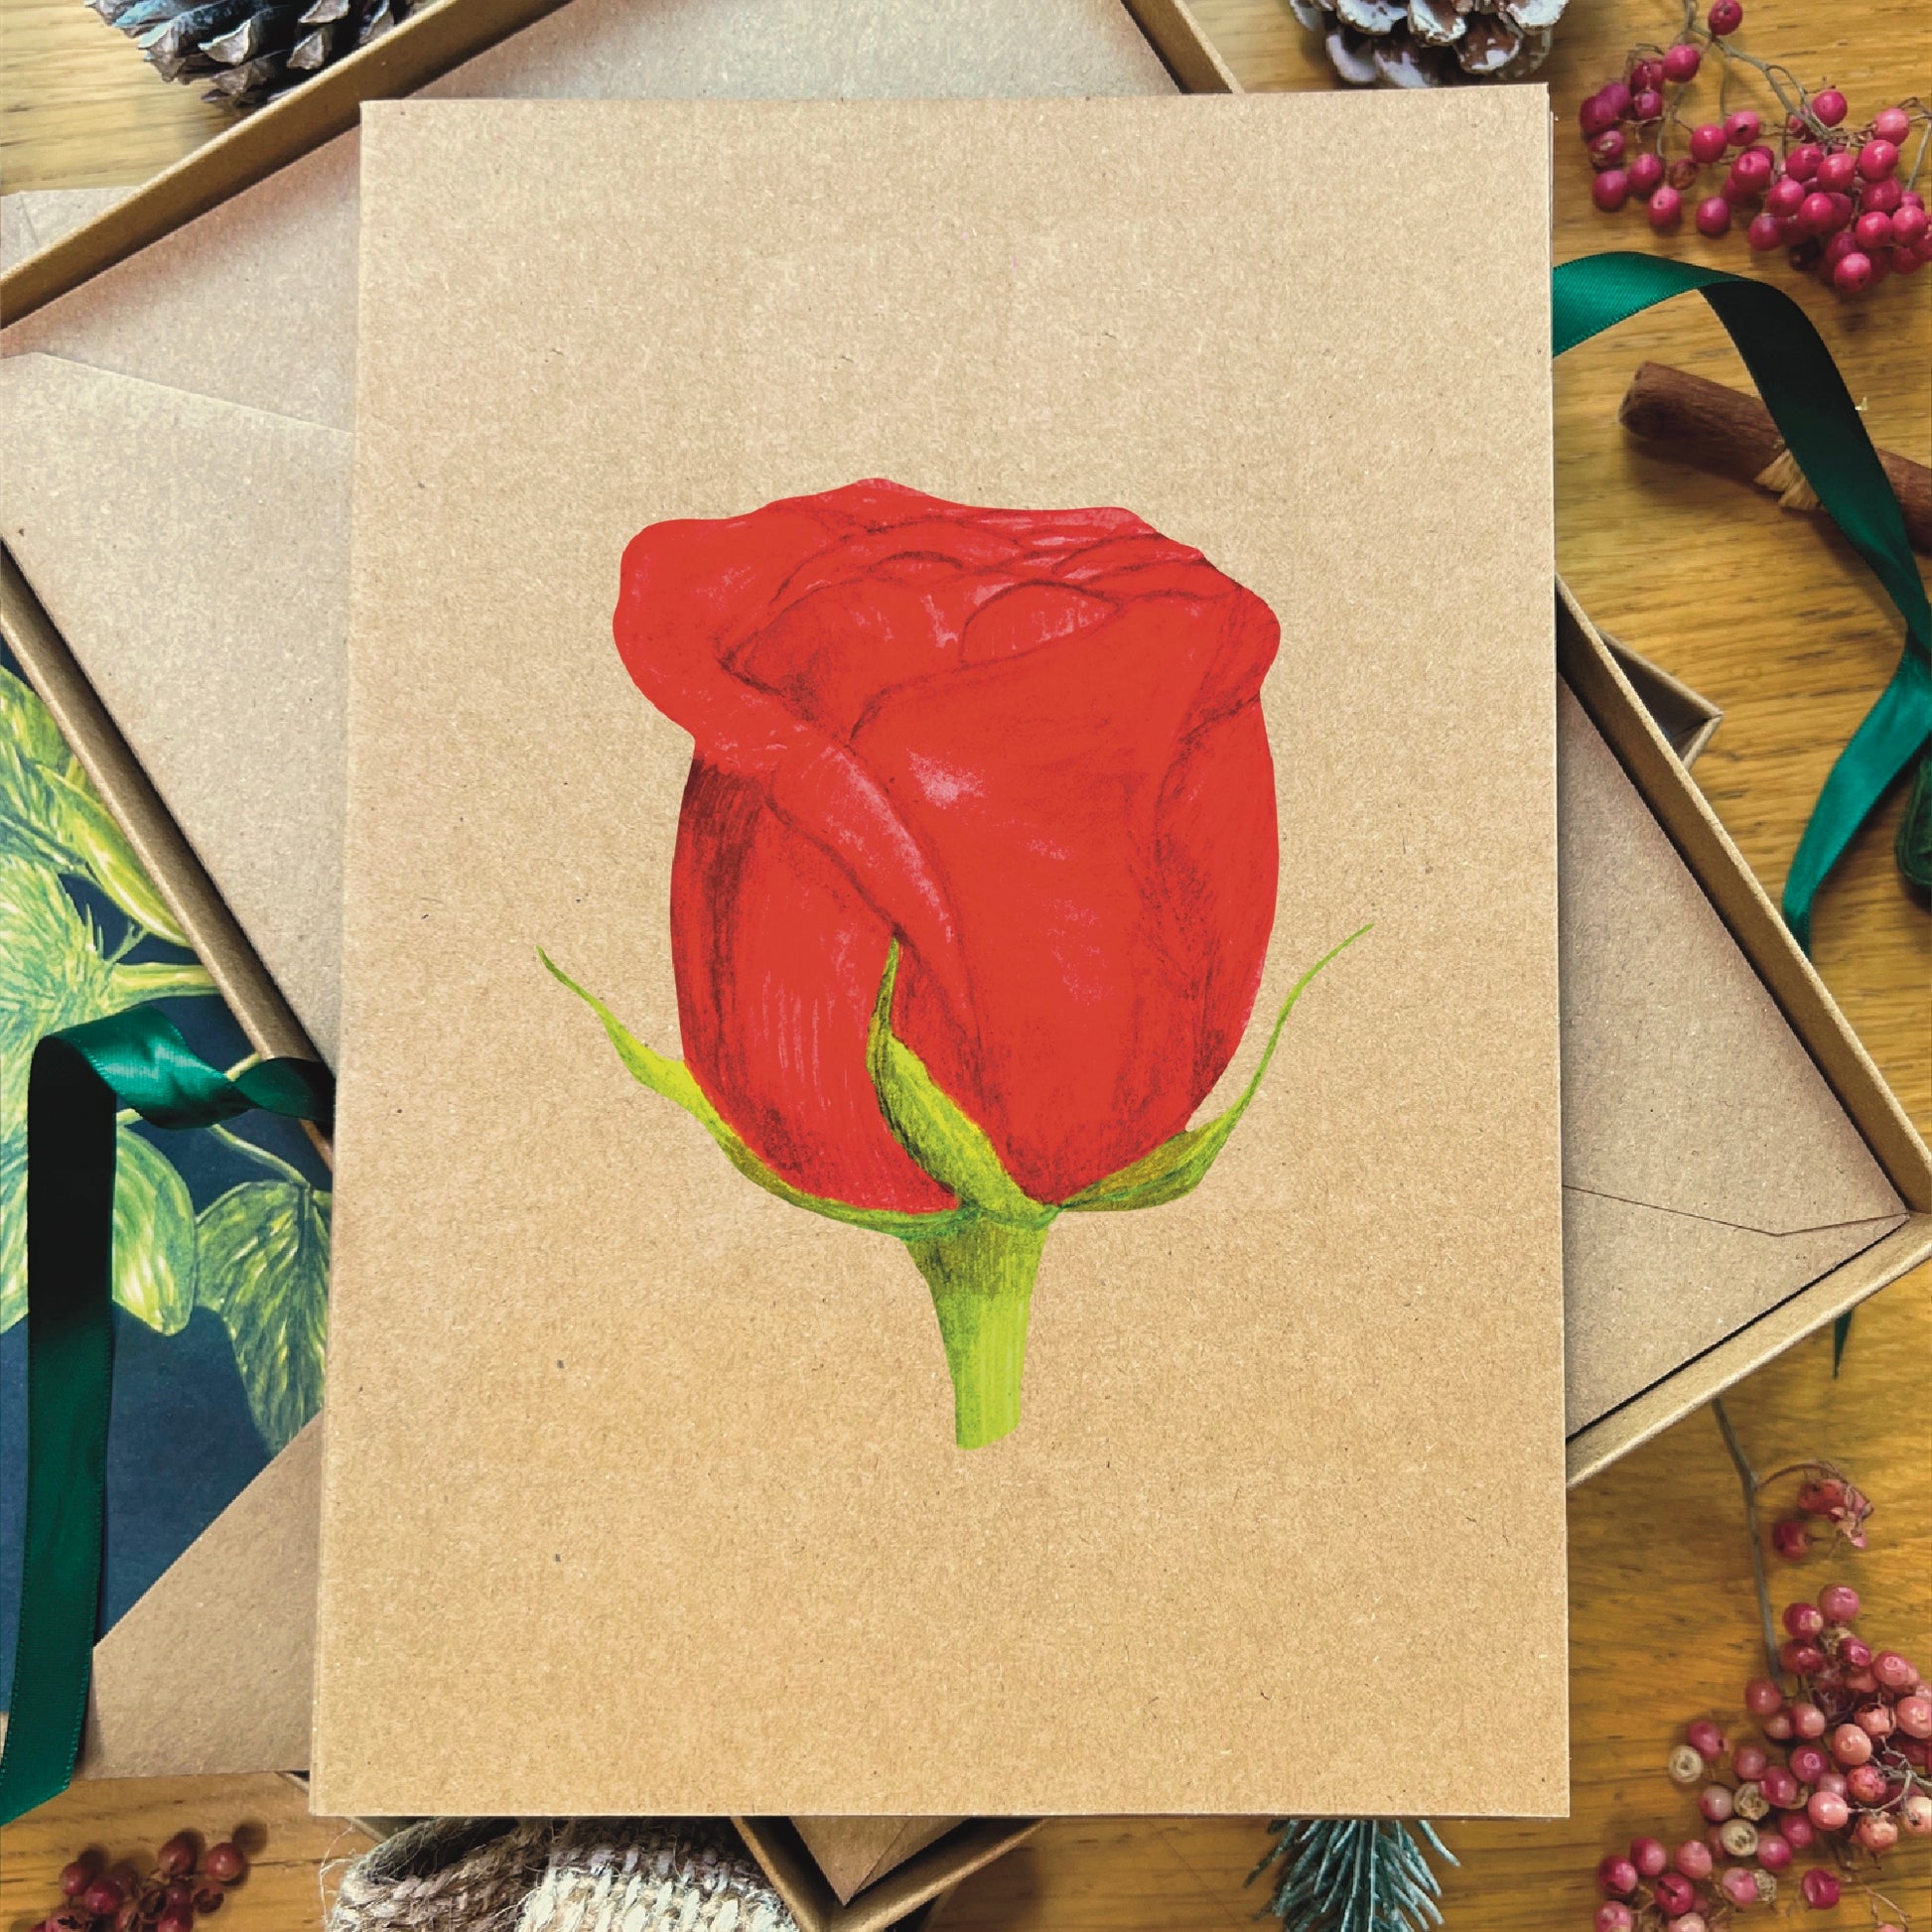 Red hybrid tea rose illustrated in watercolour attached to brown Manila recycled greetings card on a wooden desk